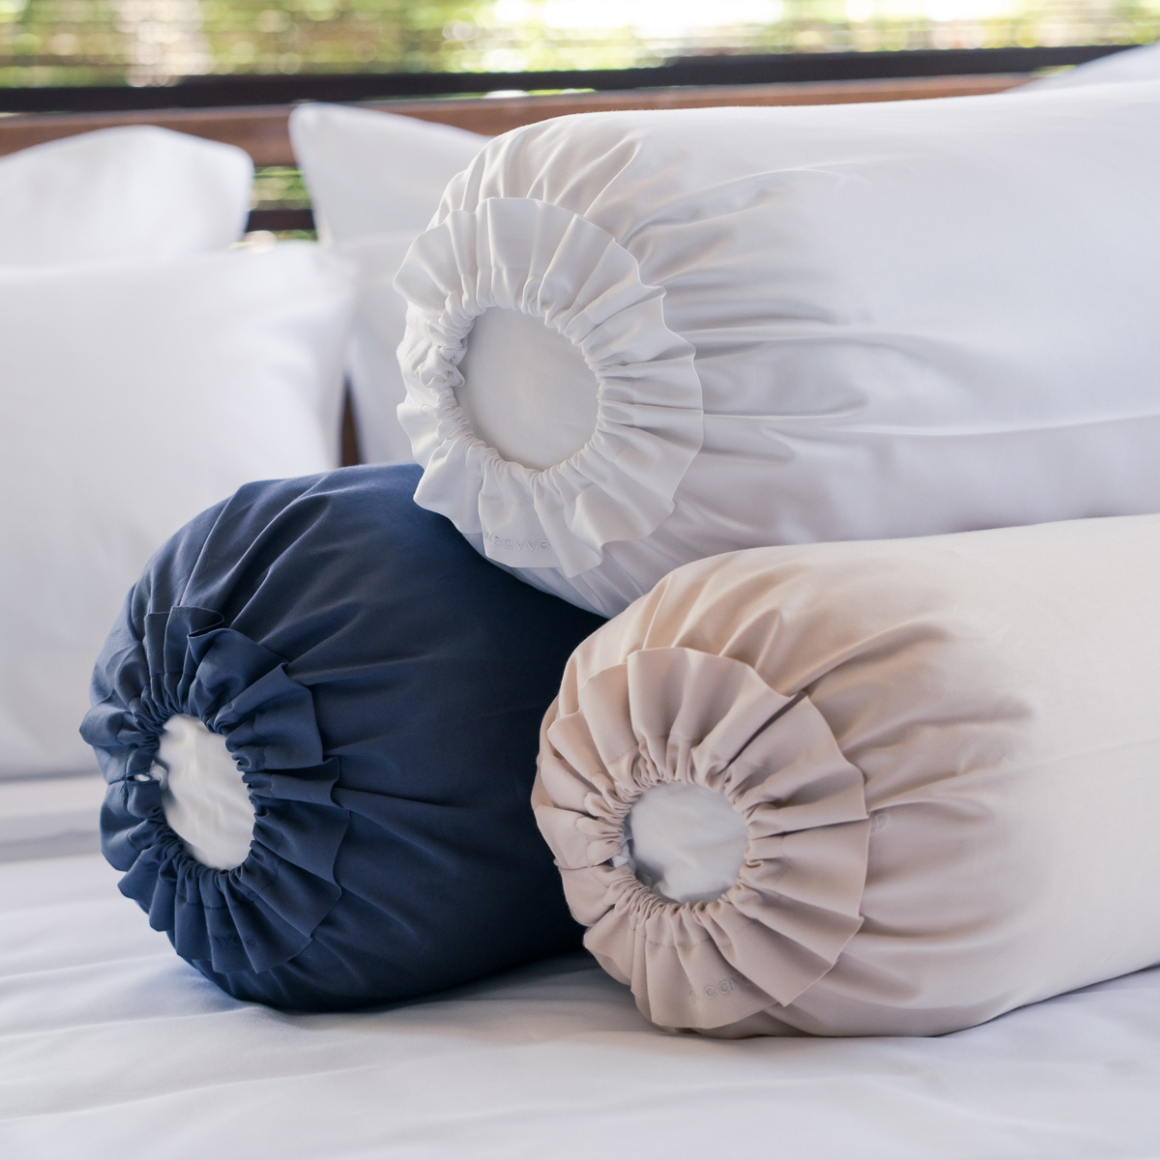 Soft &amp; buttery-smooth cotton sateen sheets. 600 thread count, 100% pure extra long staple cotton fibres. Cotton Bolster Case from Singapore Weavve Home Cotton Collection.